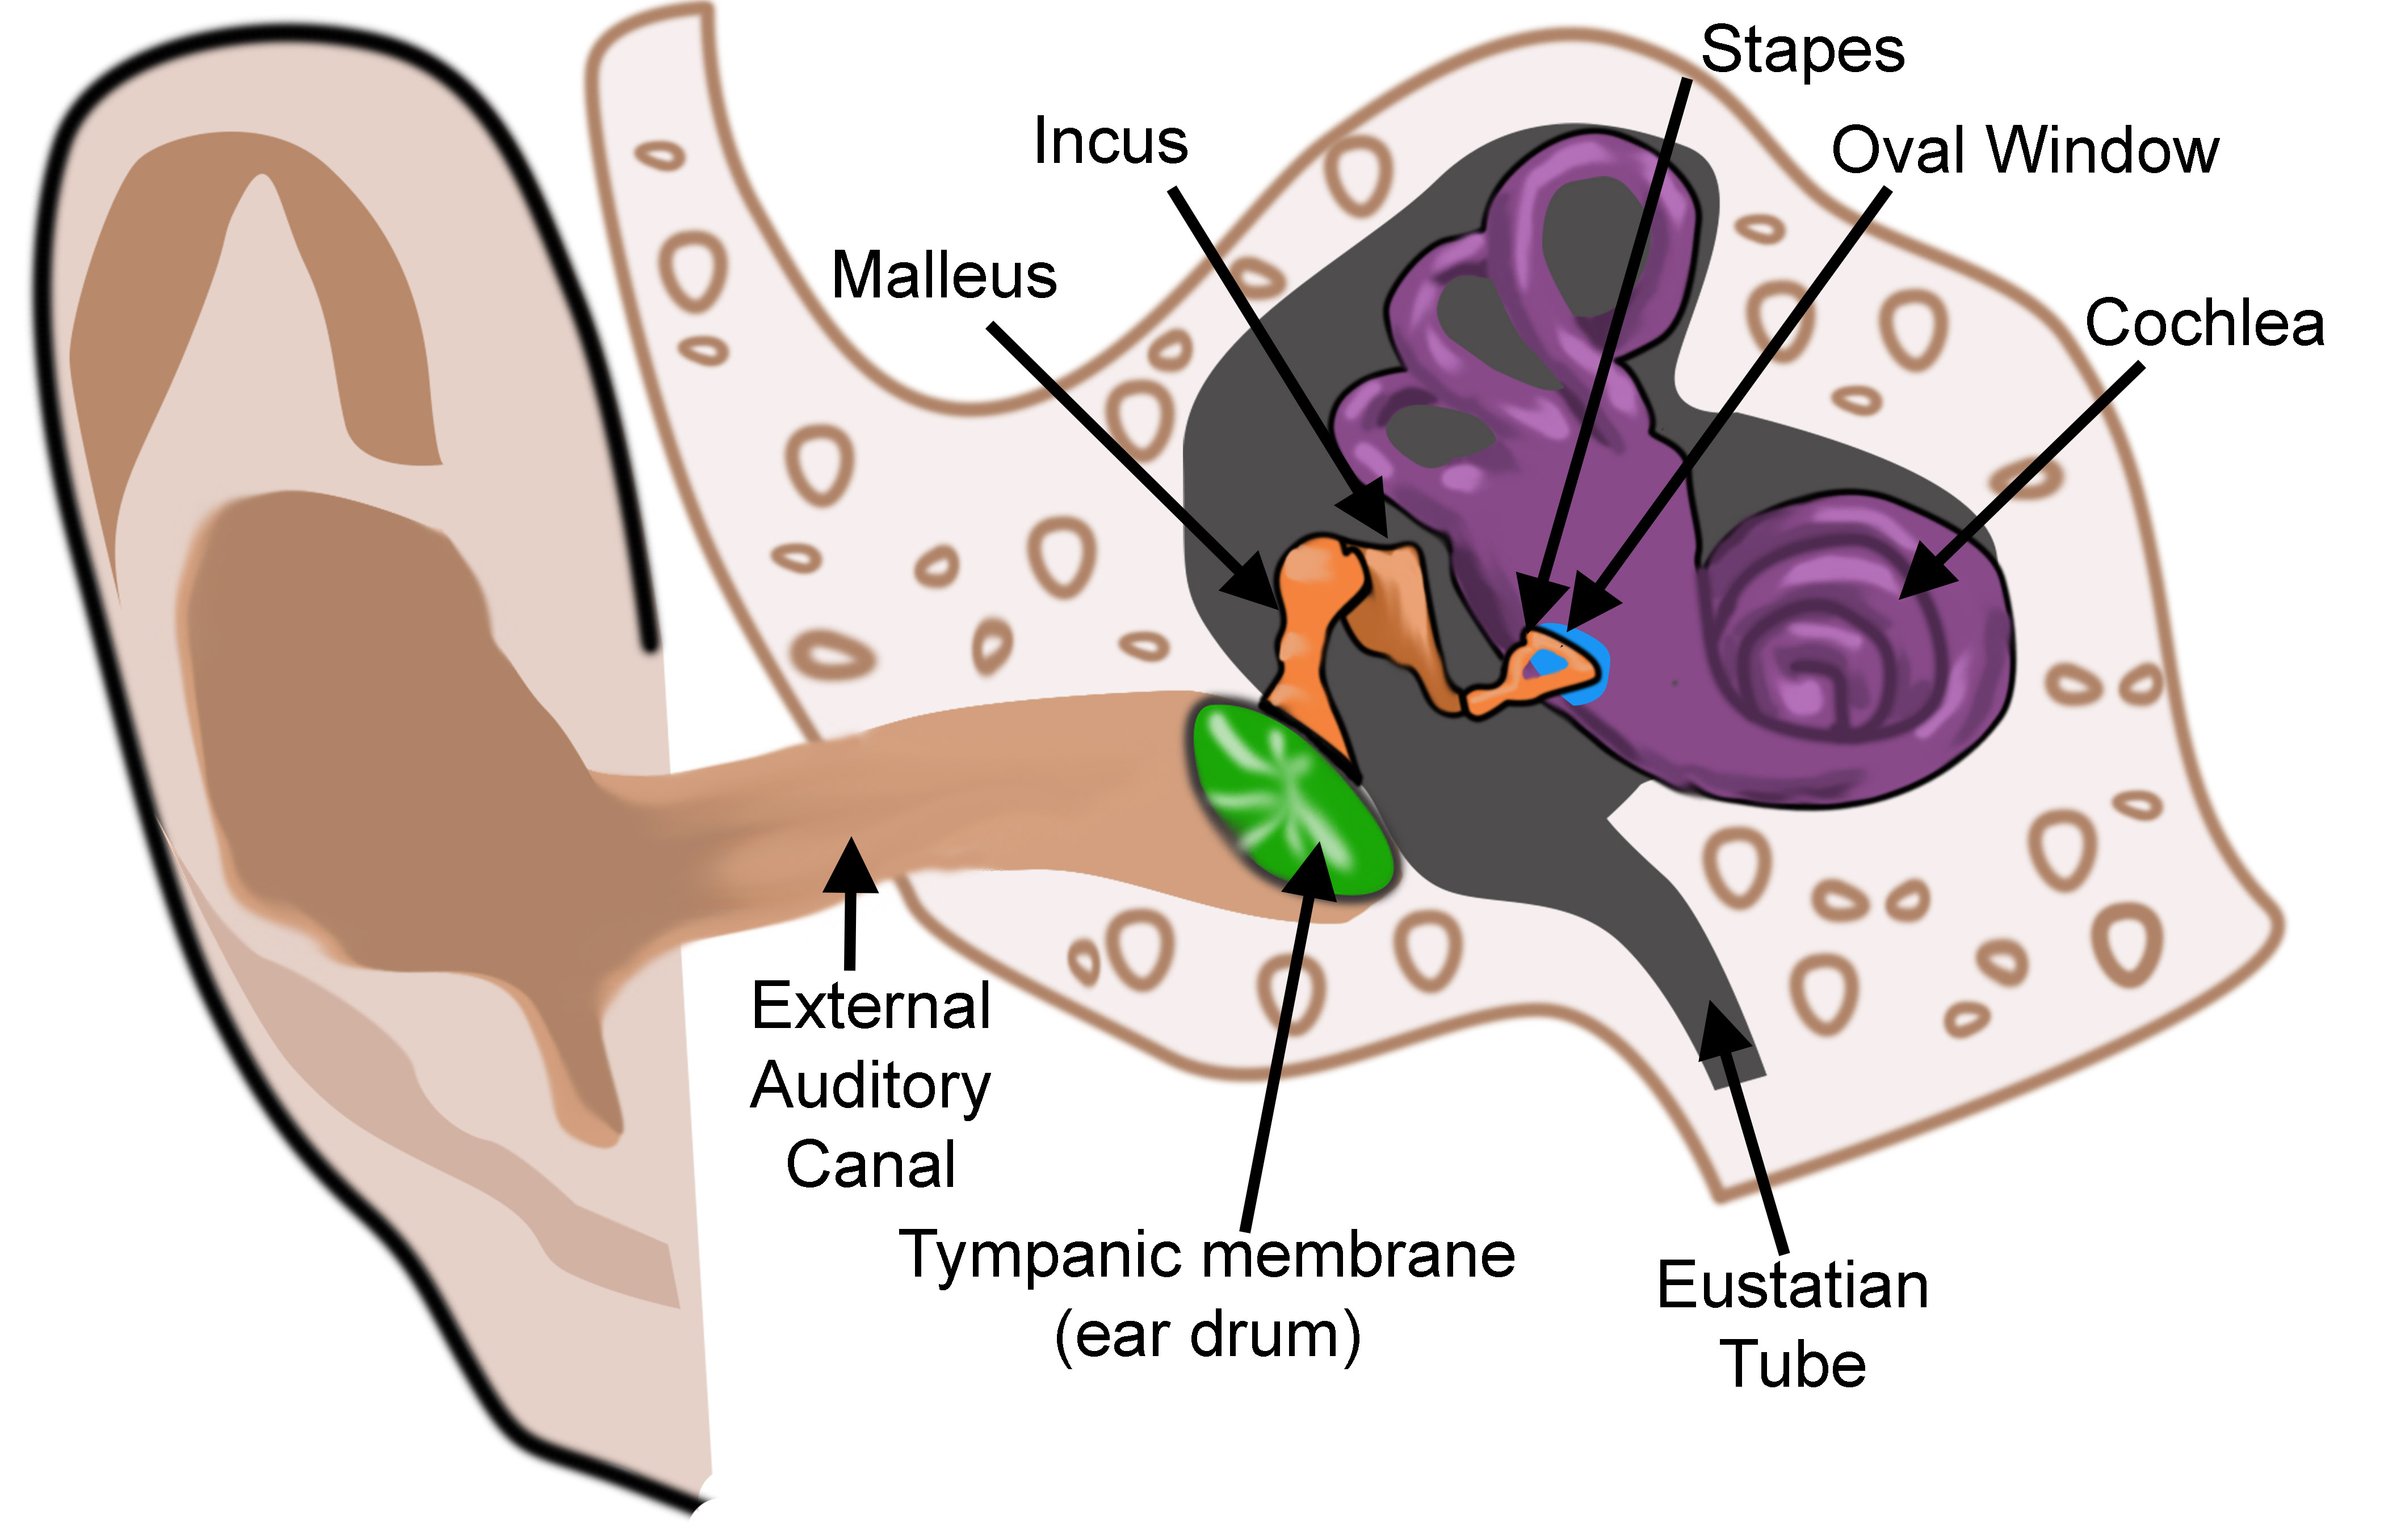 Anatomy of the outer, middle, and inner ear.